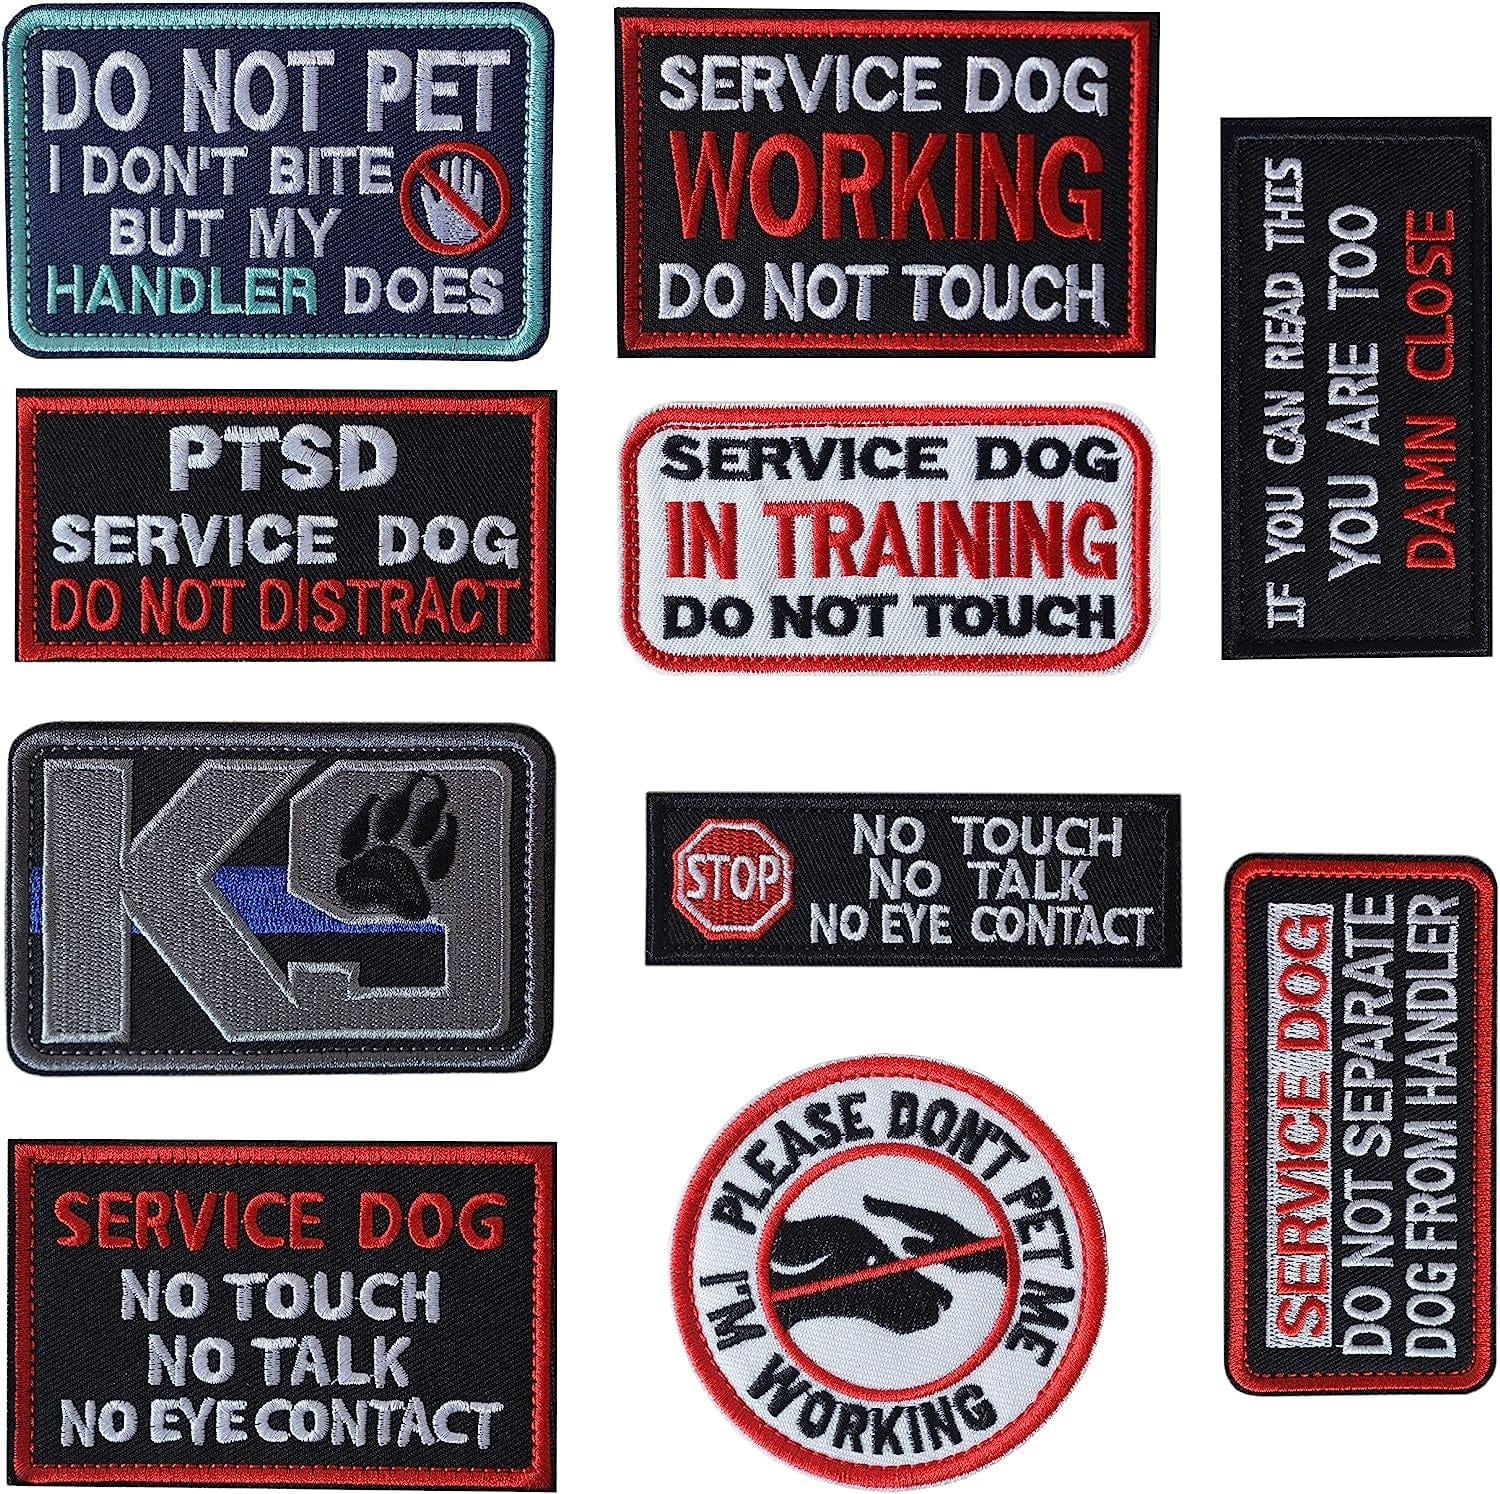 Would it be rude to put a bunch of service dog patches on my